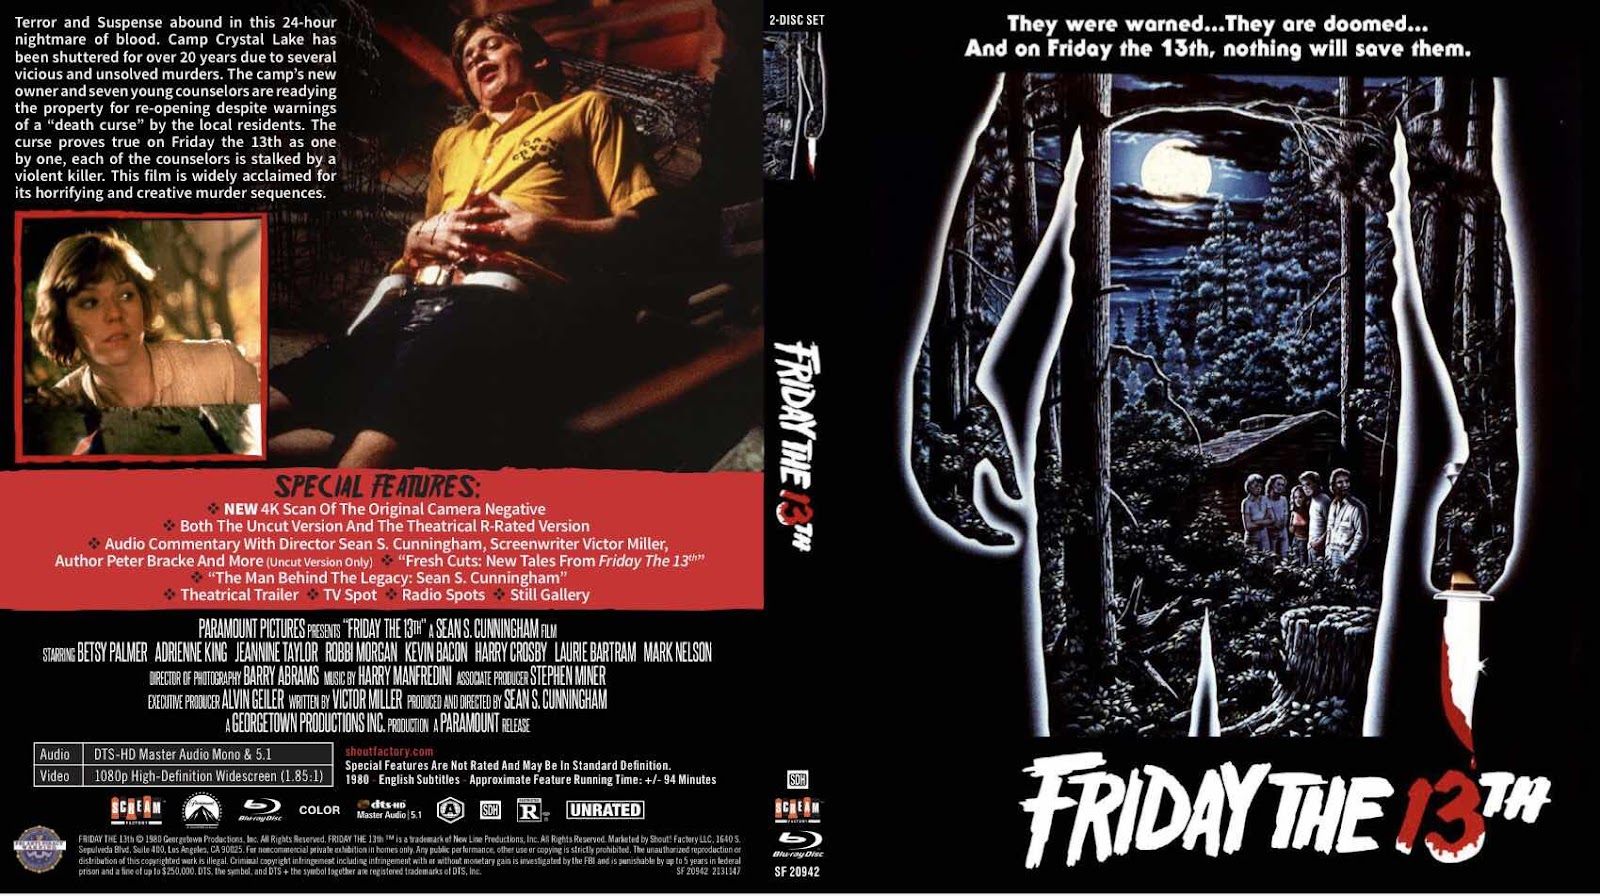 Check Out Each Film Cover Of Scream Factory’s Friday The 13th Box Set